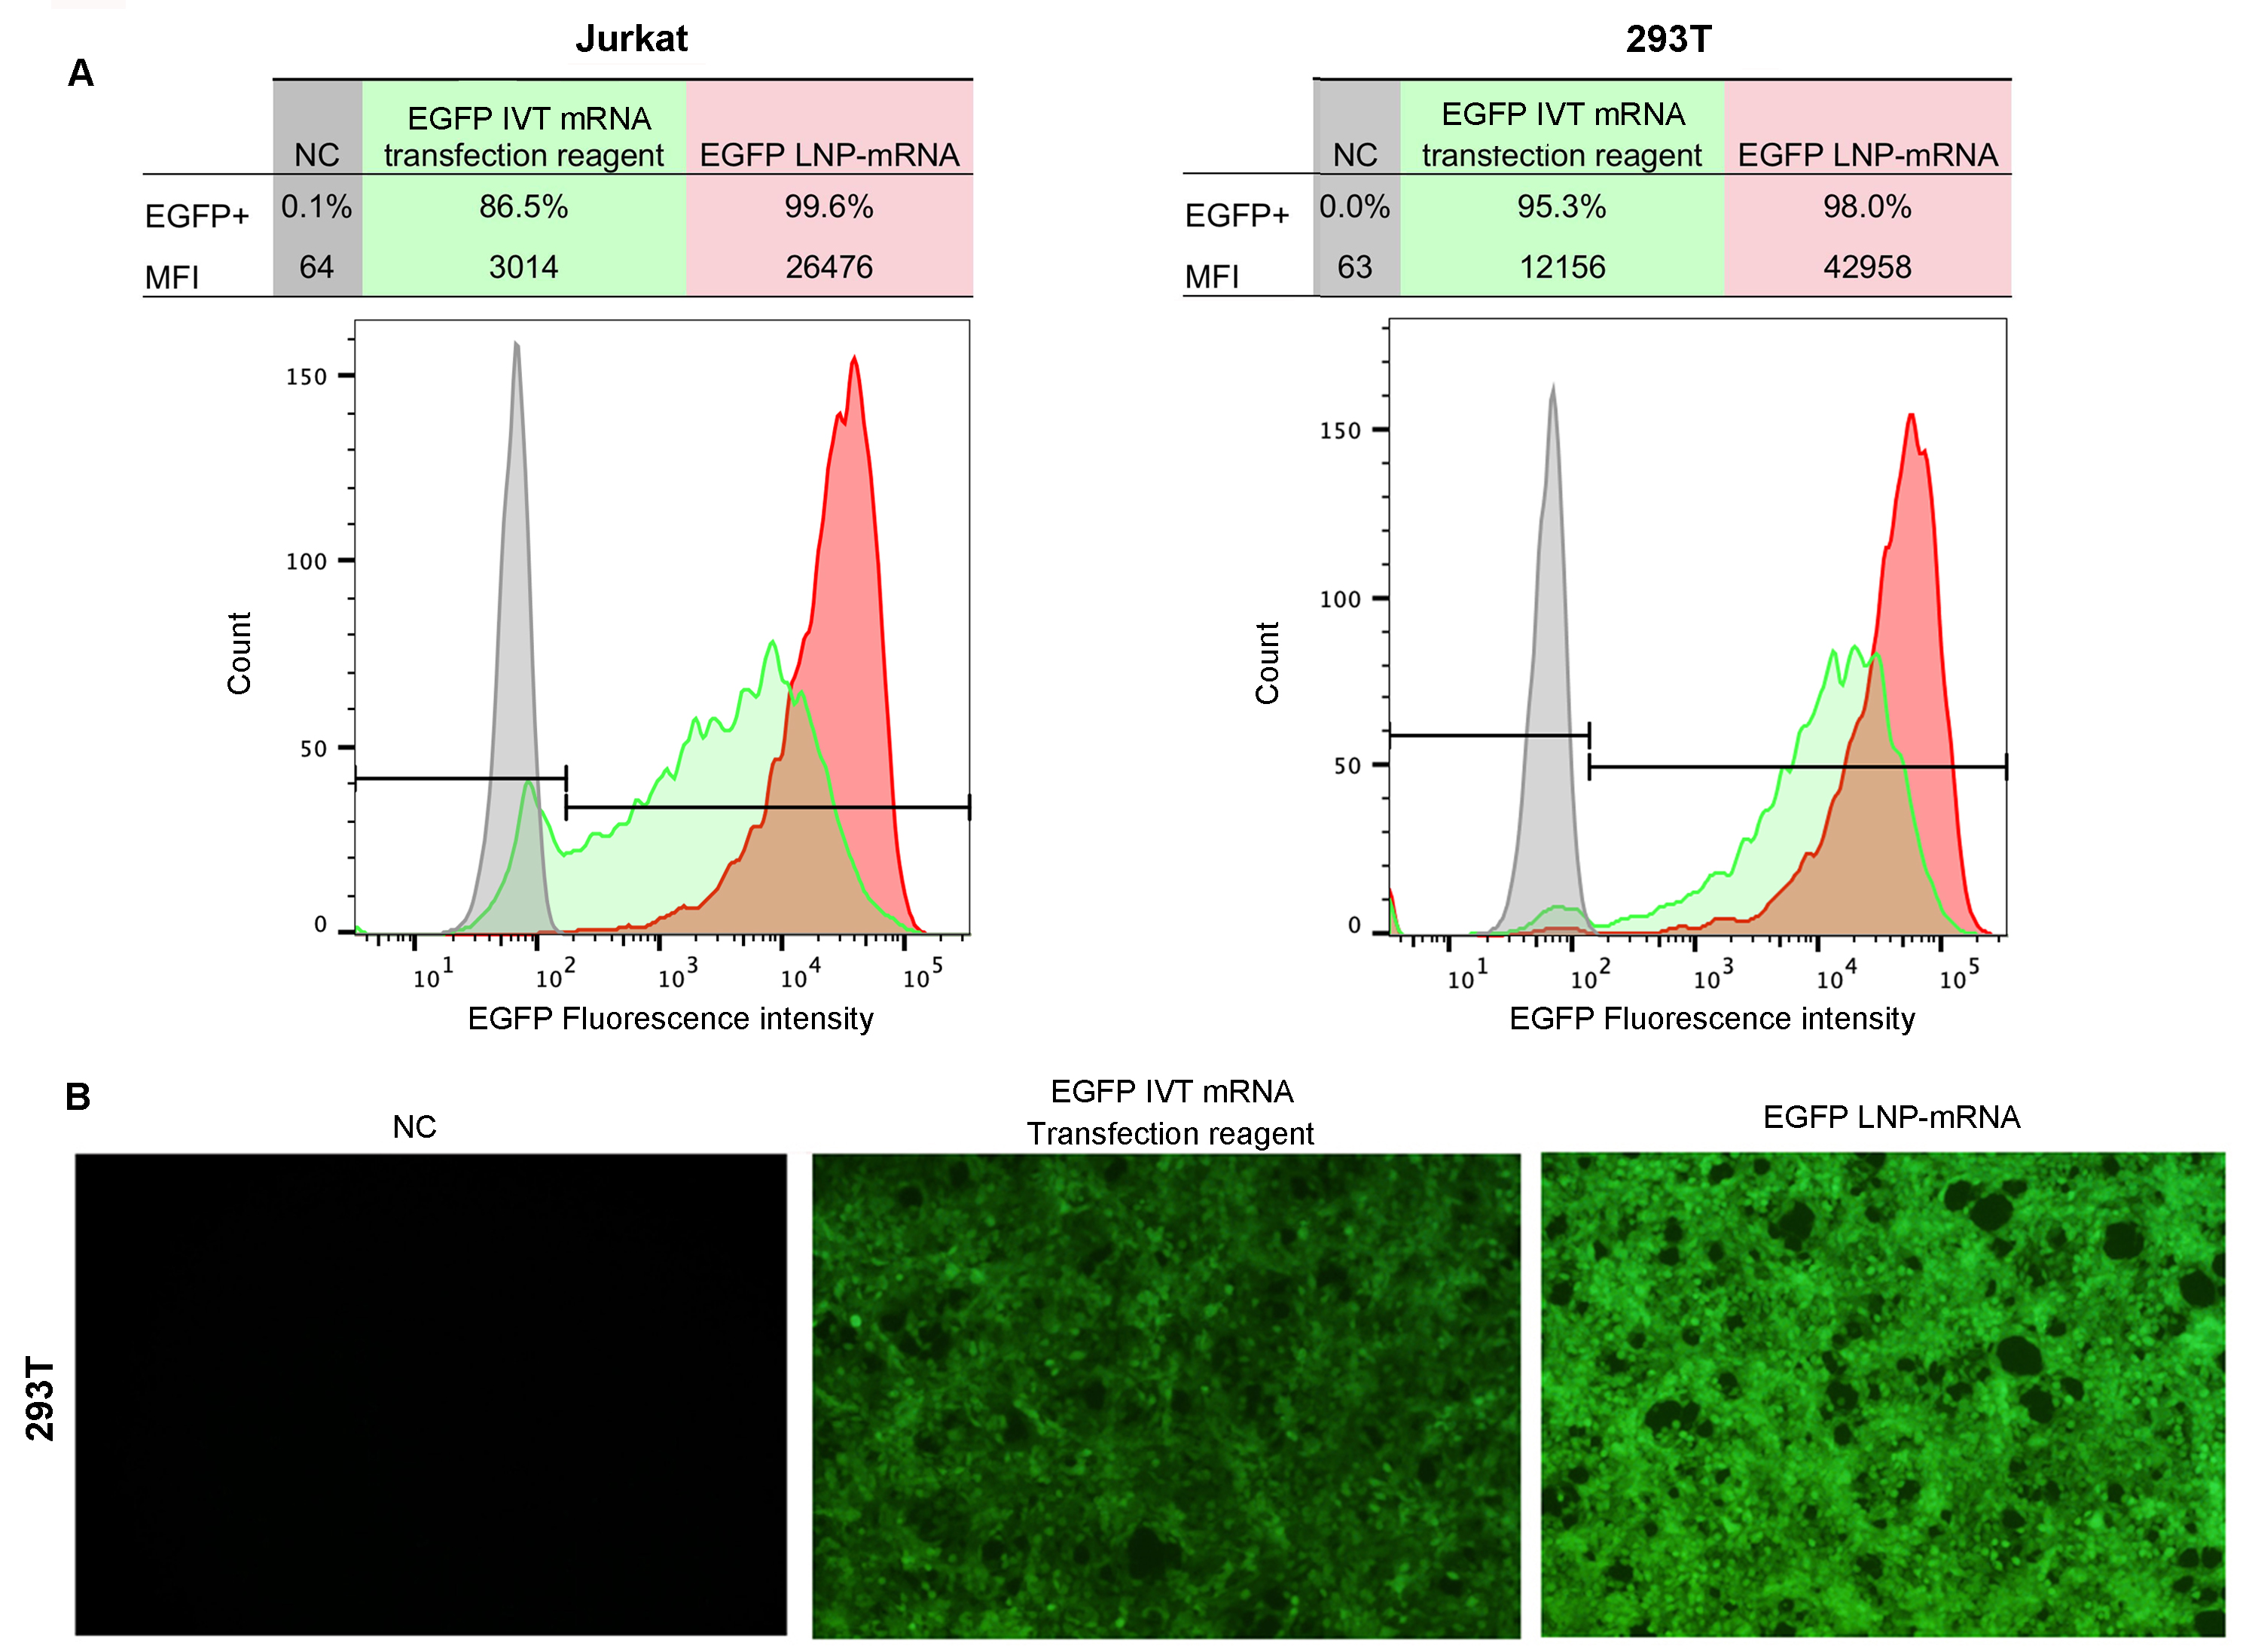 Flow cytometry analysis & fluorescent images for HeLa cells being transfected with EGFP expression IVT mRNA.